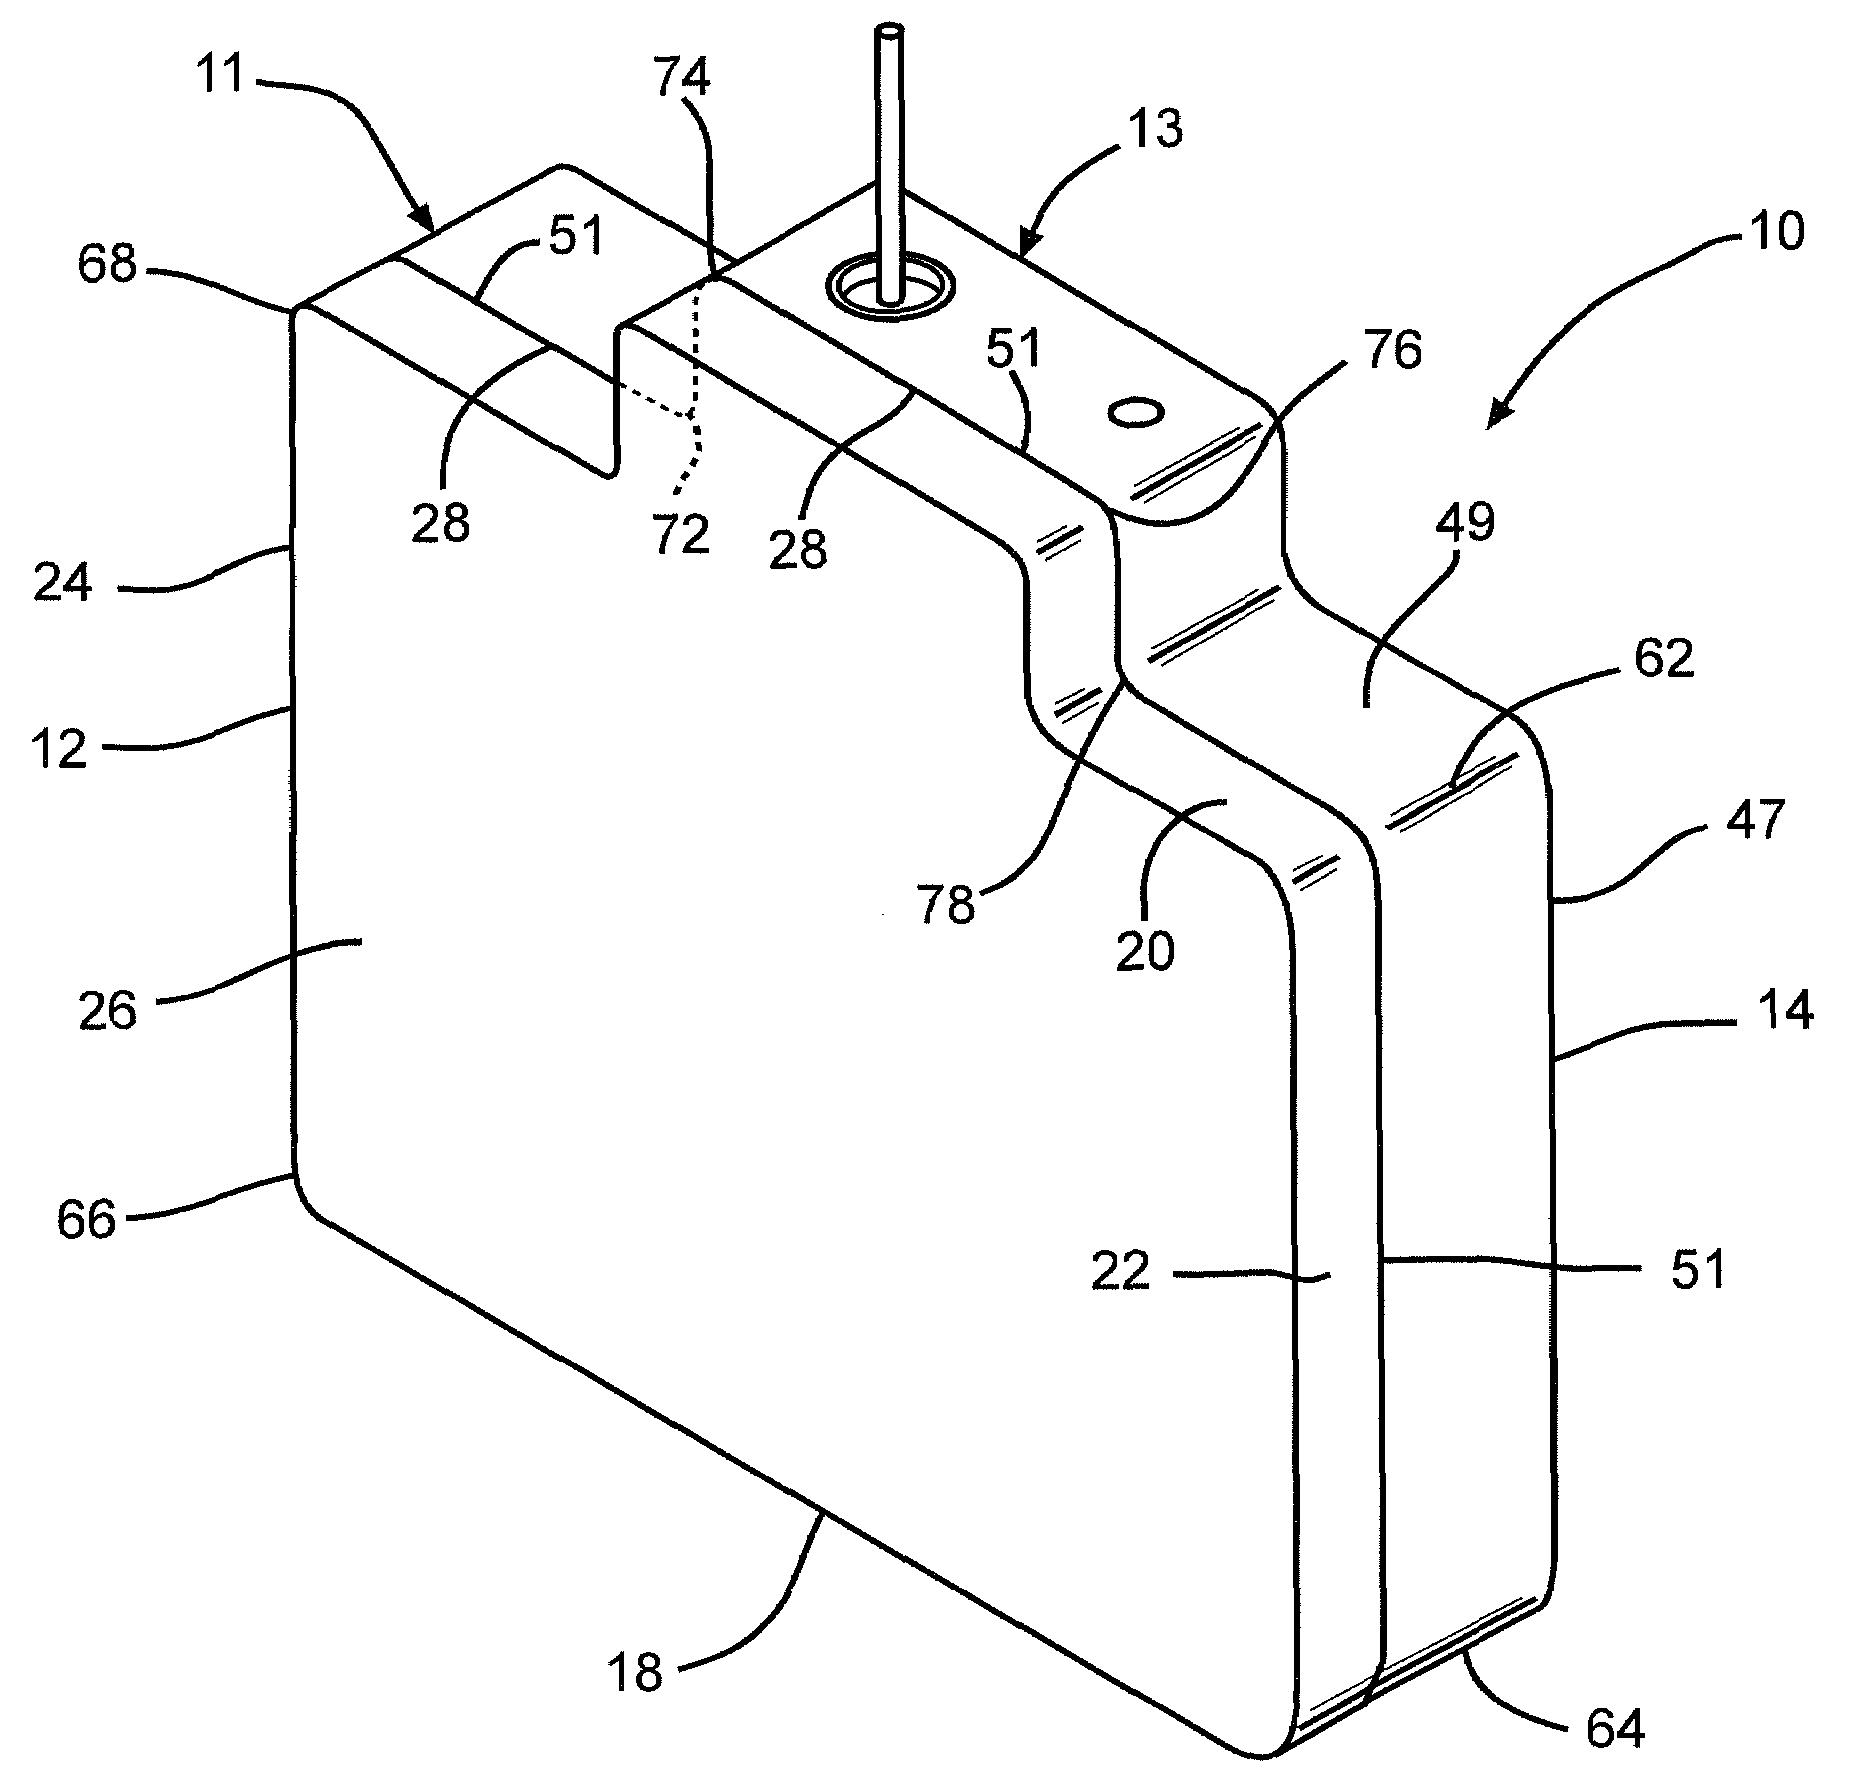 Laser Weld Process For Seam Welded Electrochemical Devices